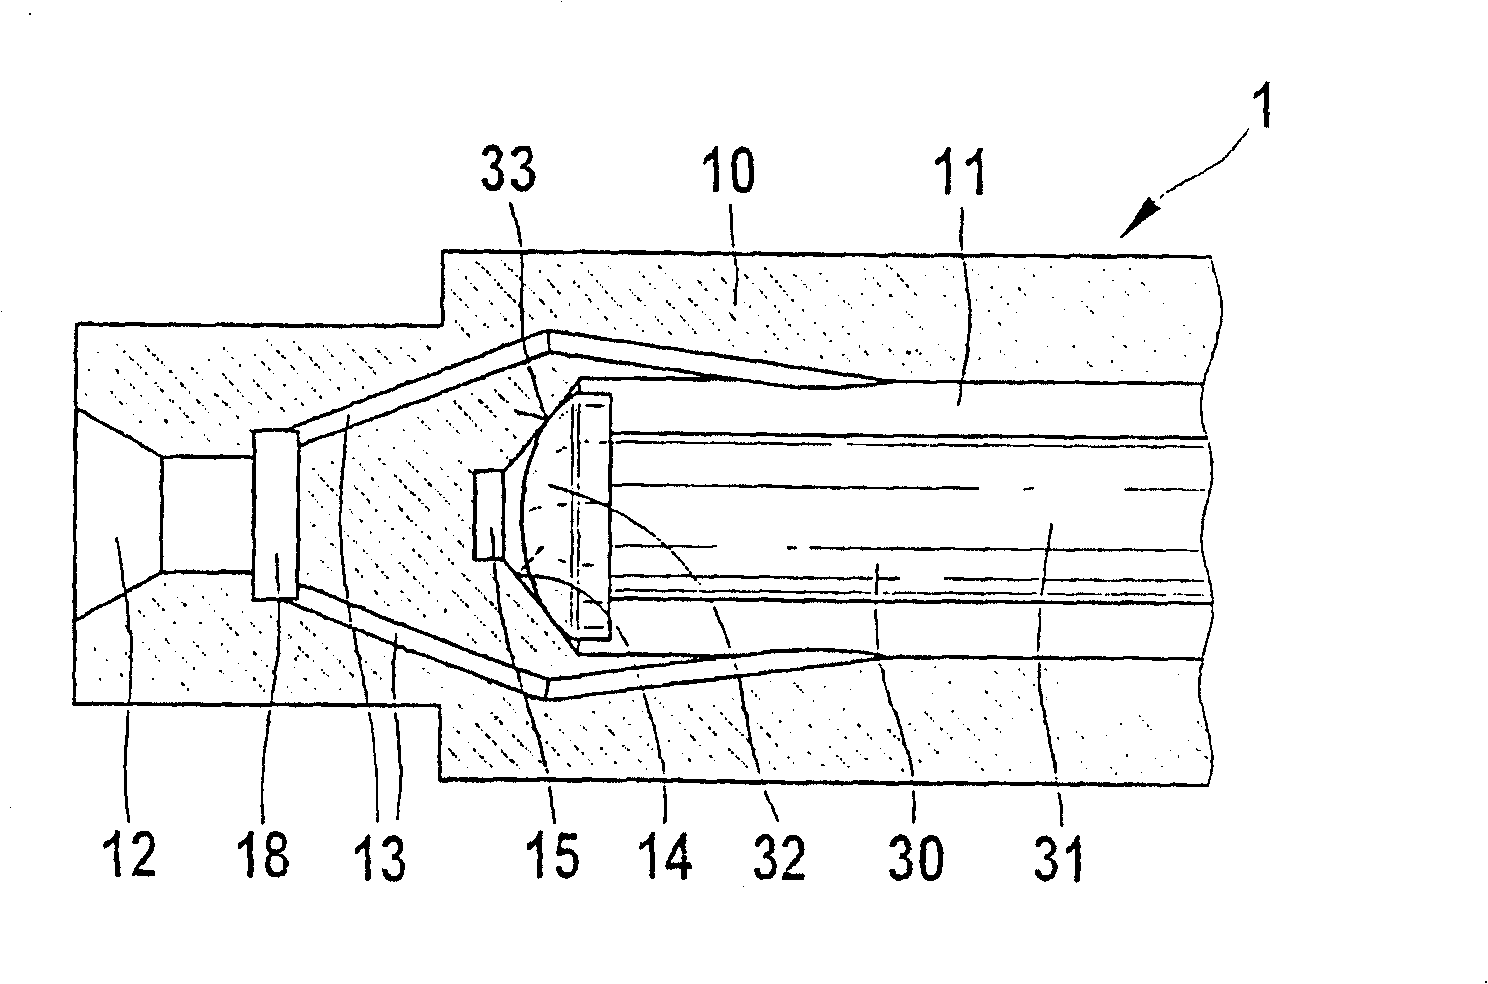 Valve for controlling fluid